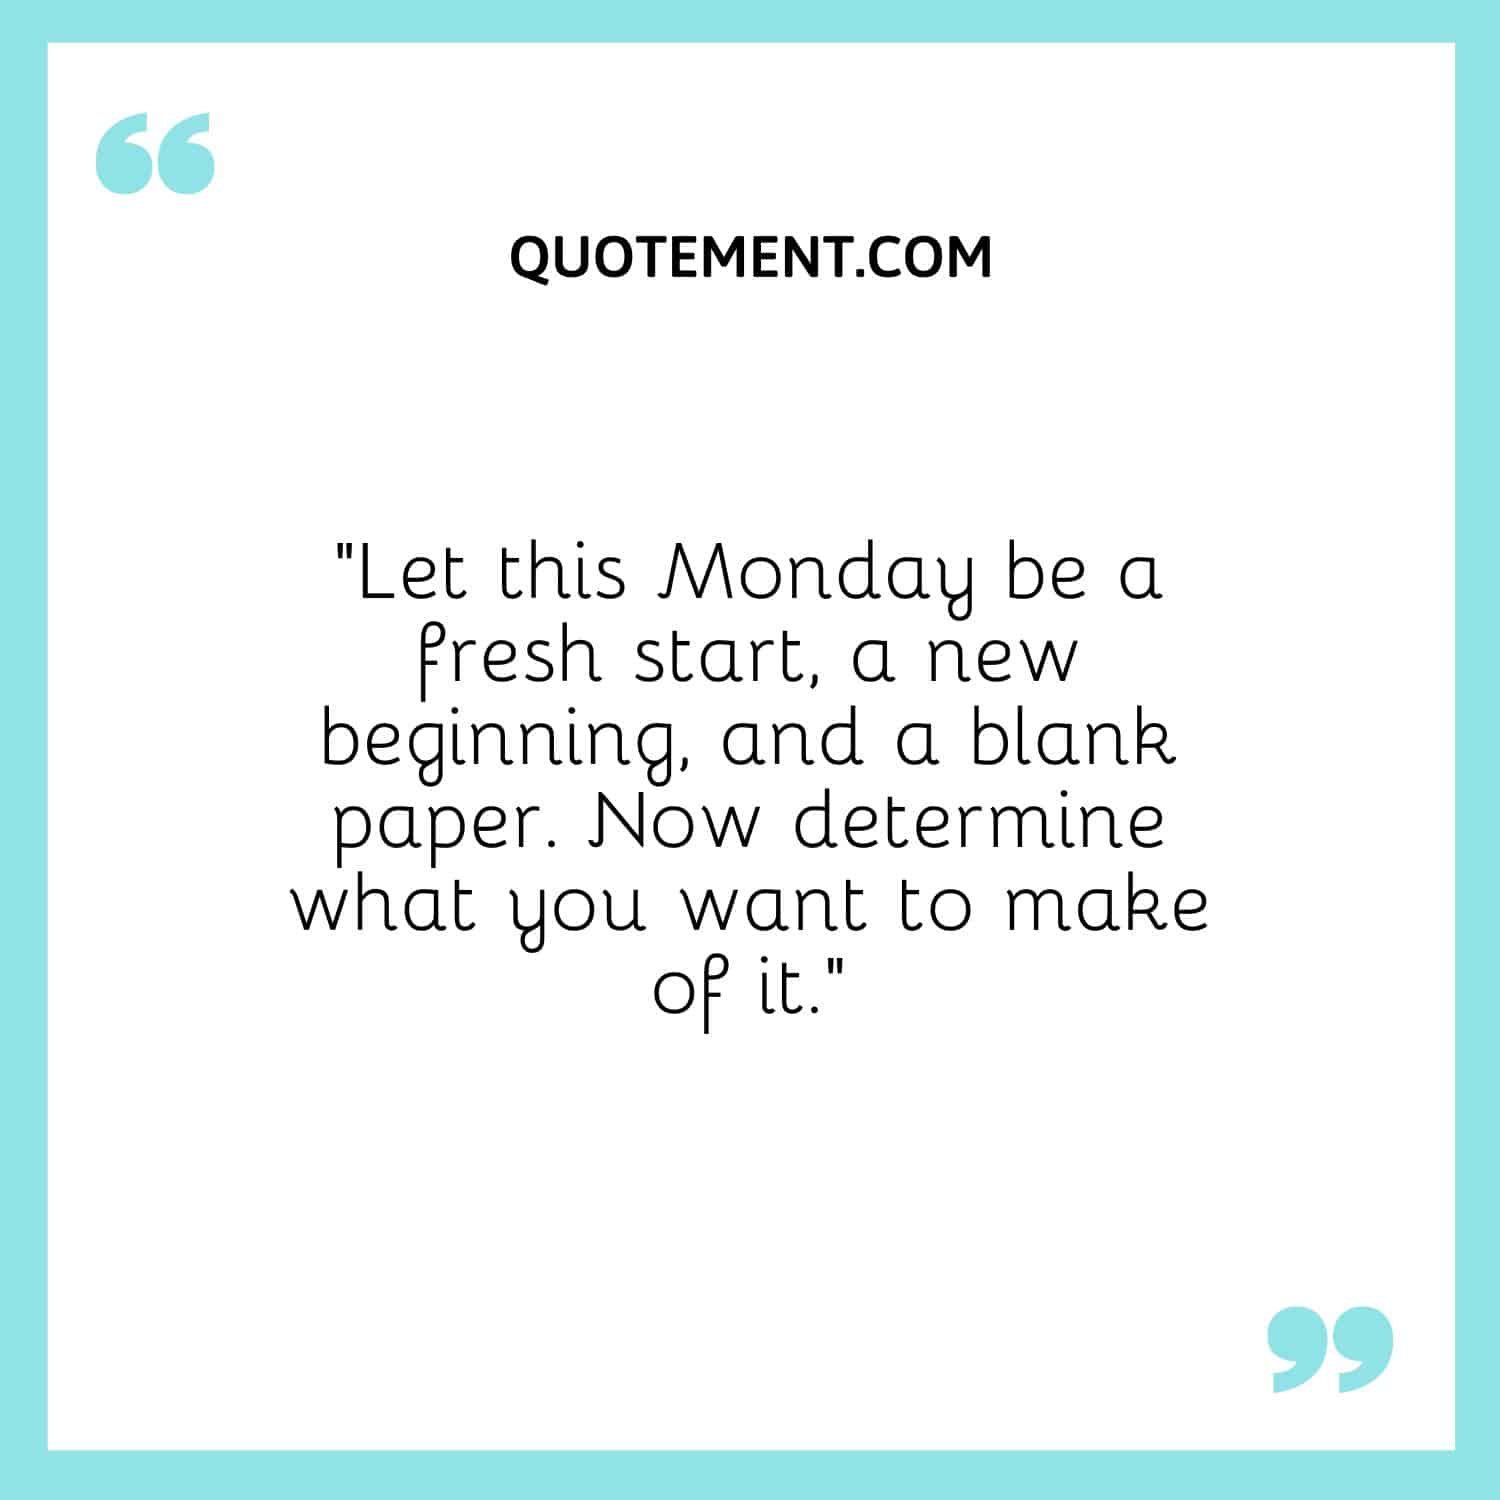 Let this Monday be a fresh start